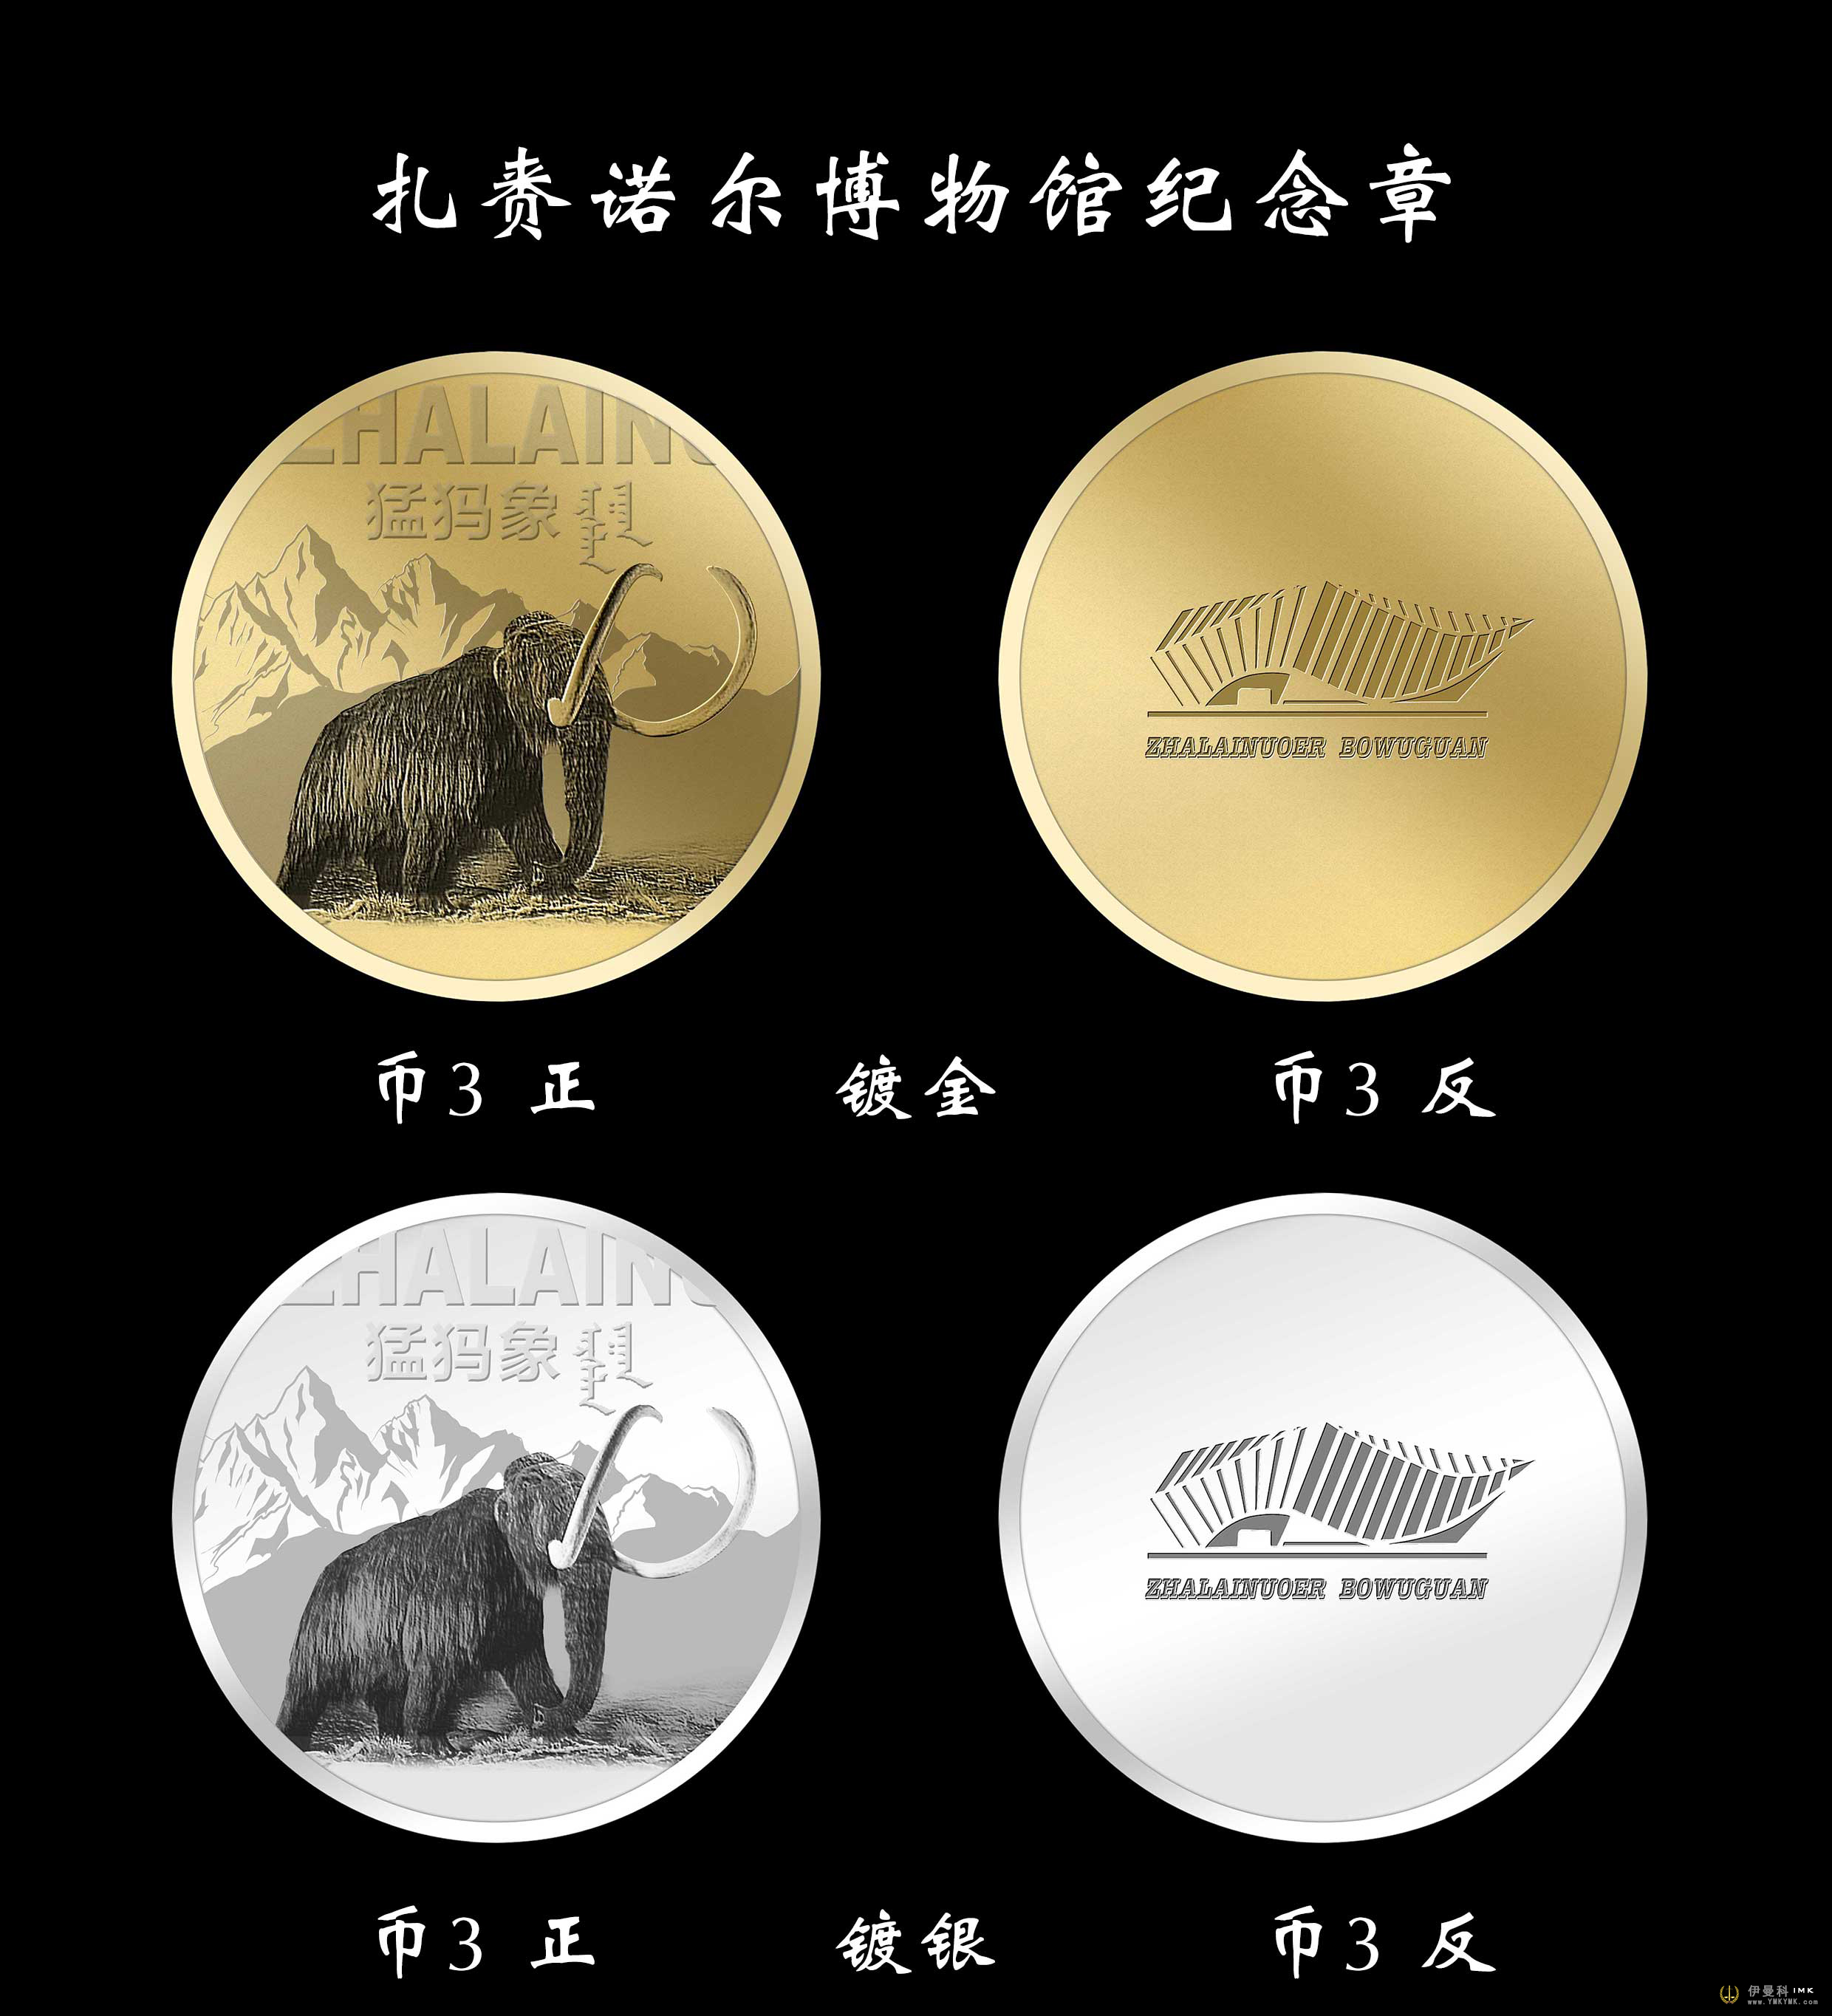 Museum Wenchuang | One memorial chapter recorded in the Glacier Century news 图5张